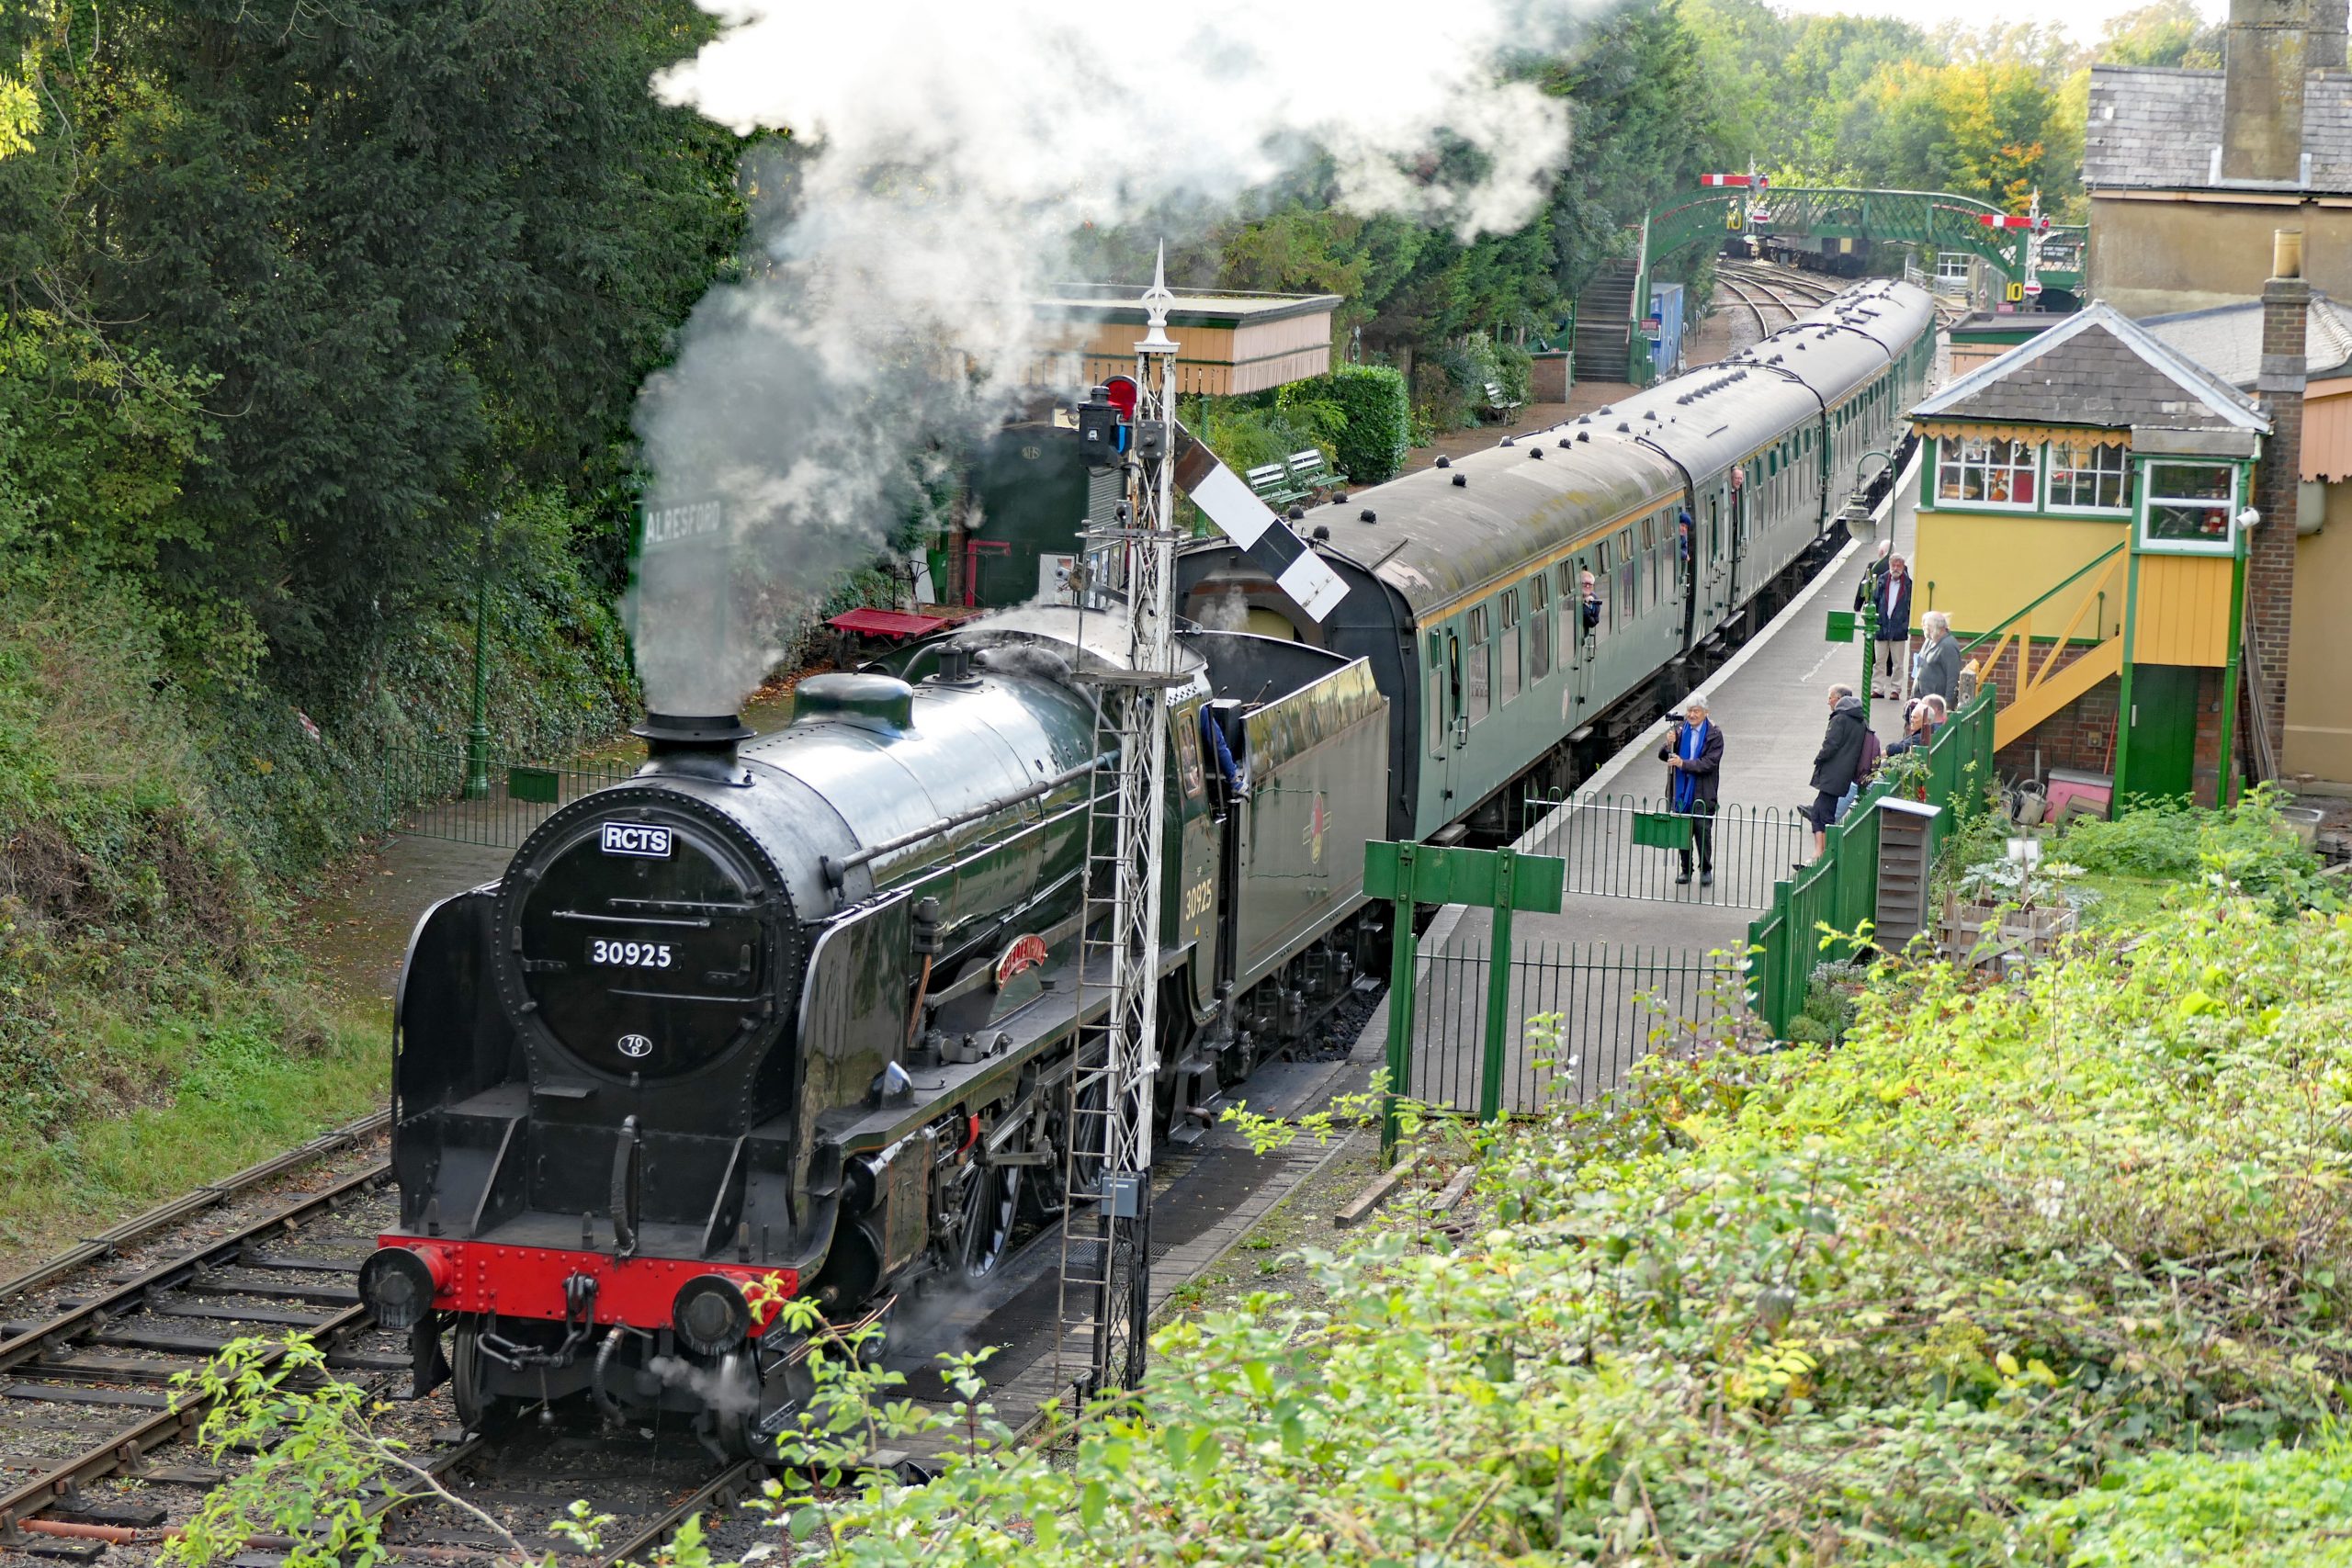 Schools Class loco 30925 Cheltenham pulls away from Alresford with the 16:20 to Alton at the Watercress Autumn Steam Gala. 07 Oct 2022.